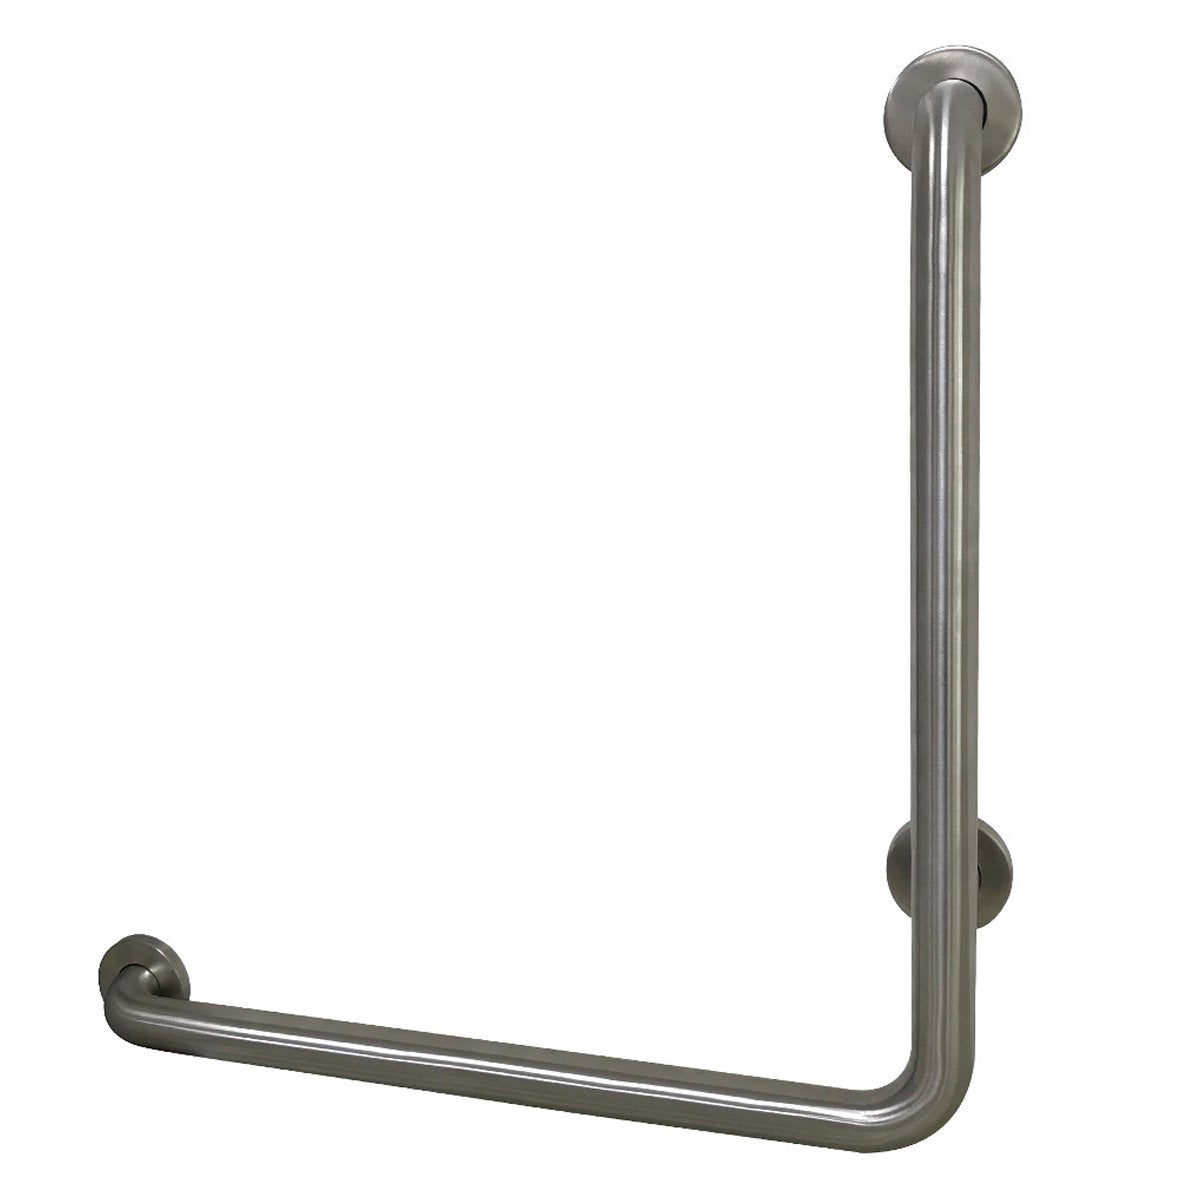 Kingston Brass Made To Match 24"x 24" L-Shaped Grab Bar - Left Hand